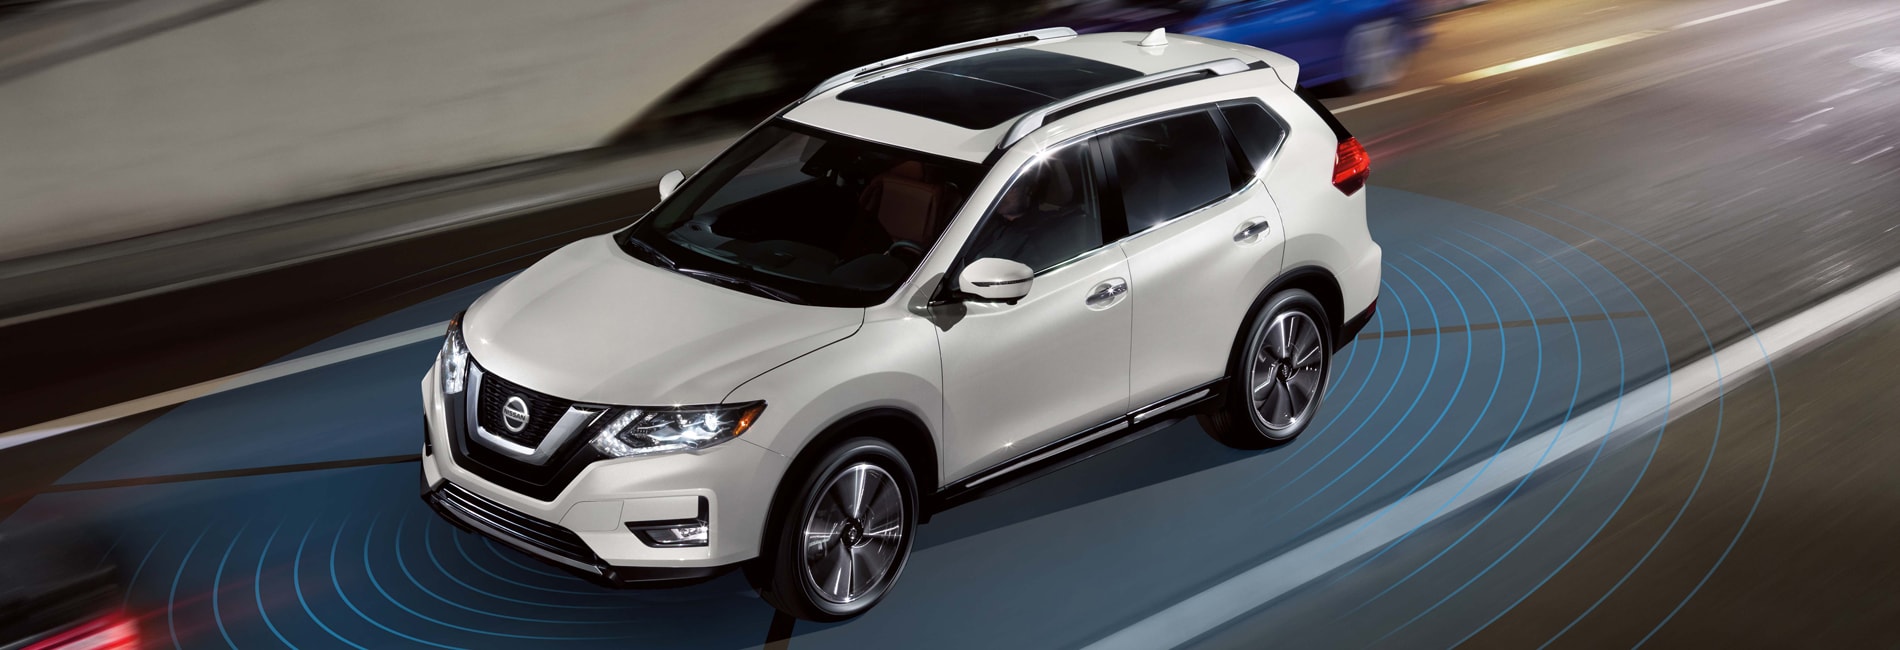 New Nissan Rogue Lease Specials and Offers Medford Nissan